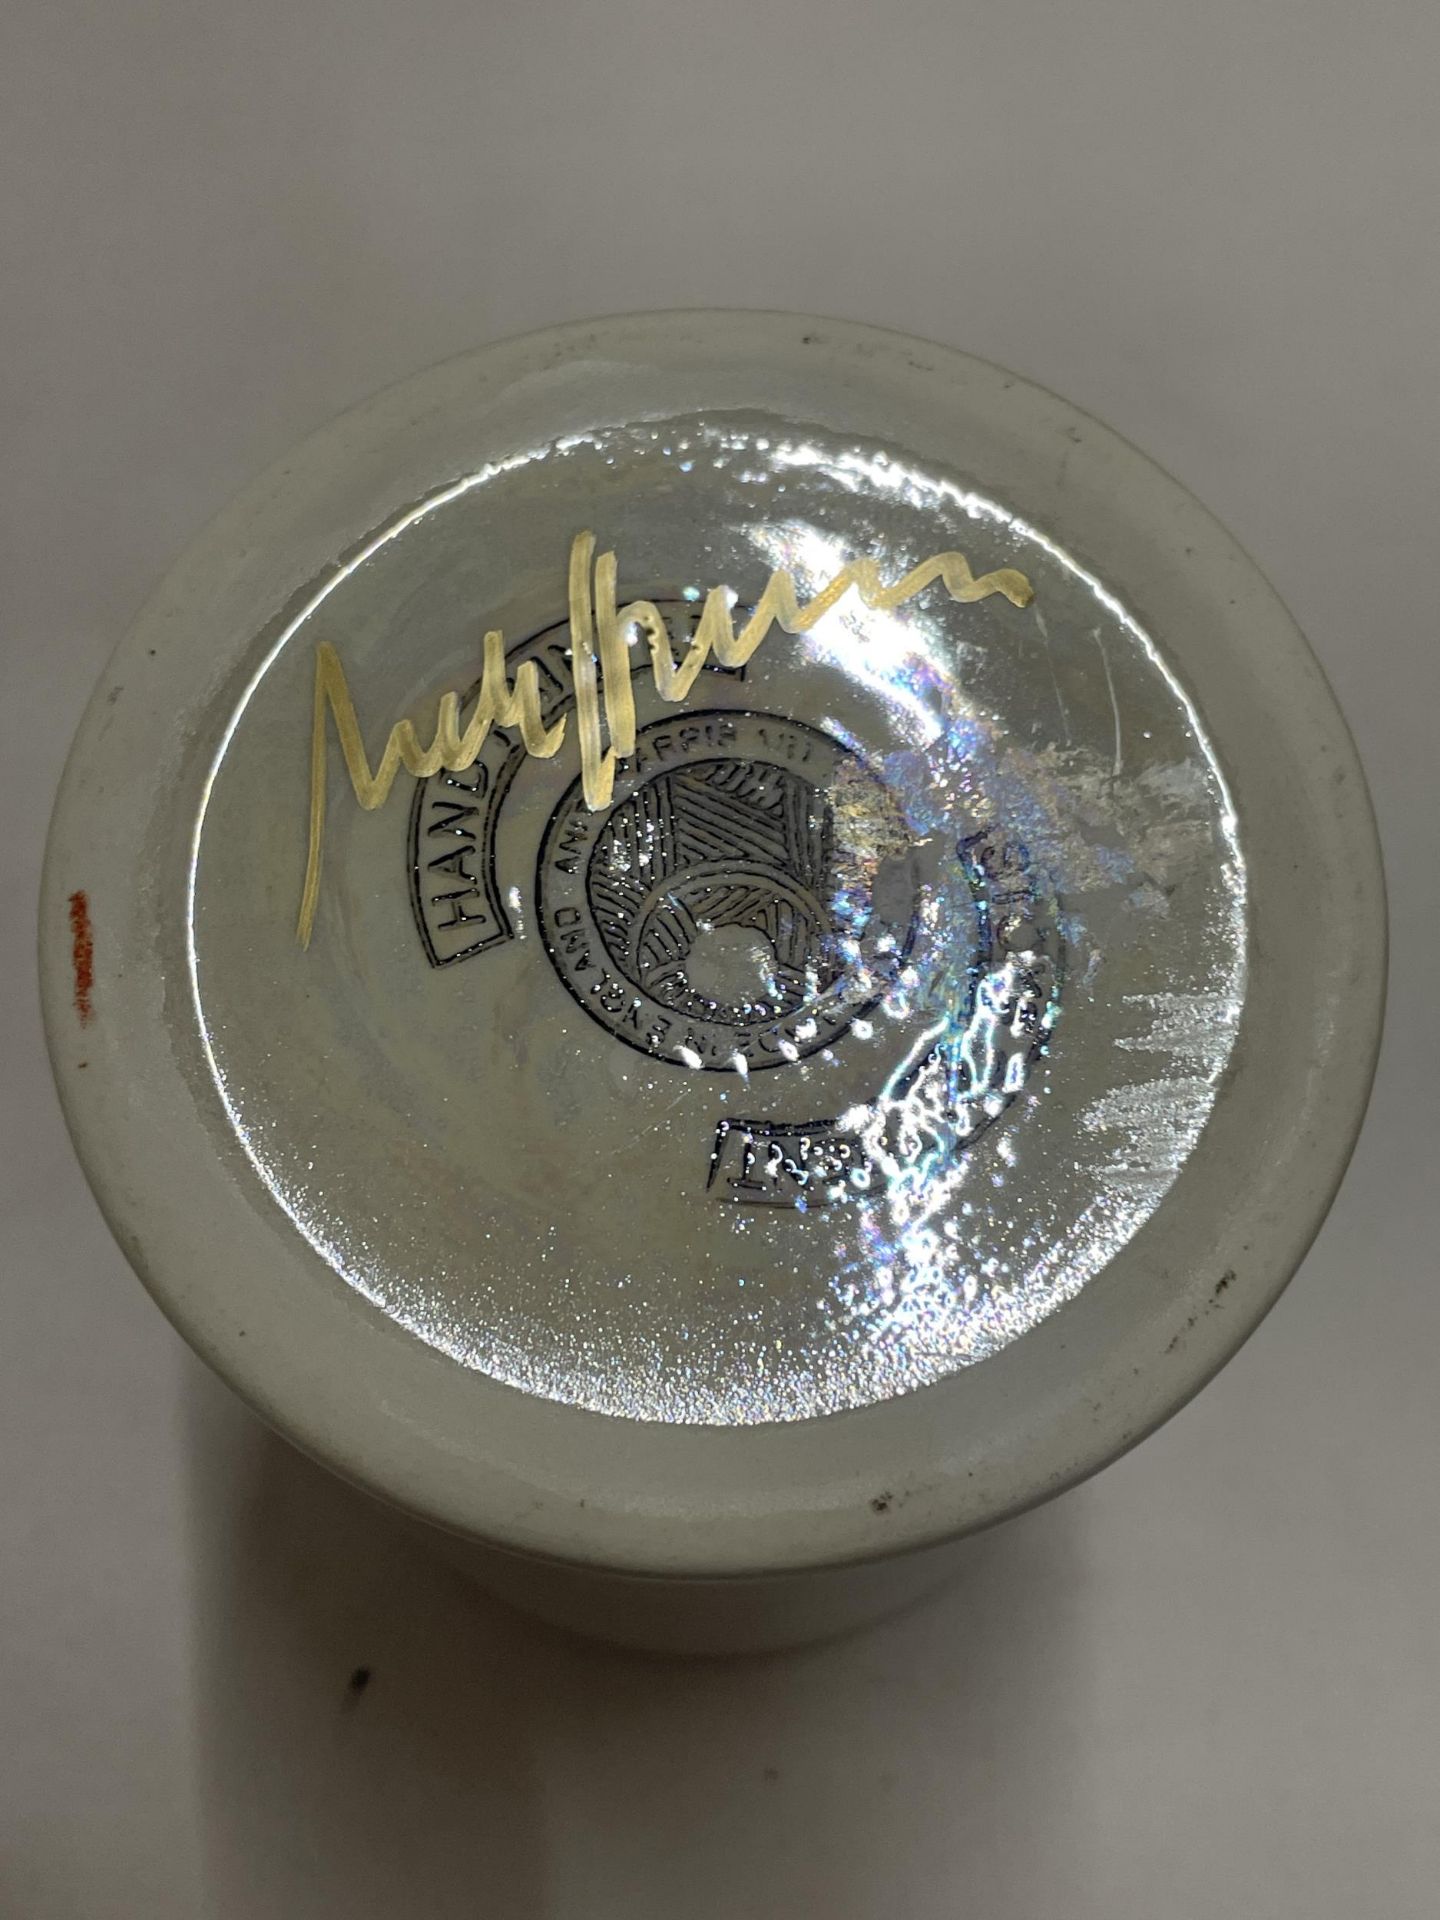 AN ANITA HARRIS HAND PAINTED AND SIGNED IN GOLD CIRCULAR CHRISTMAS TREE VASE - Image 3 of 4